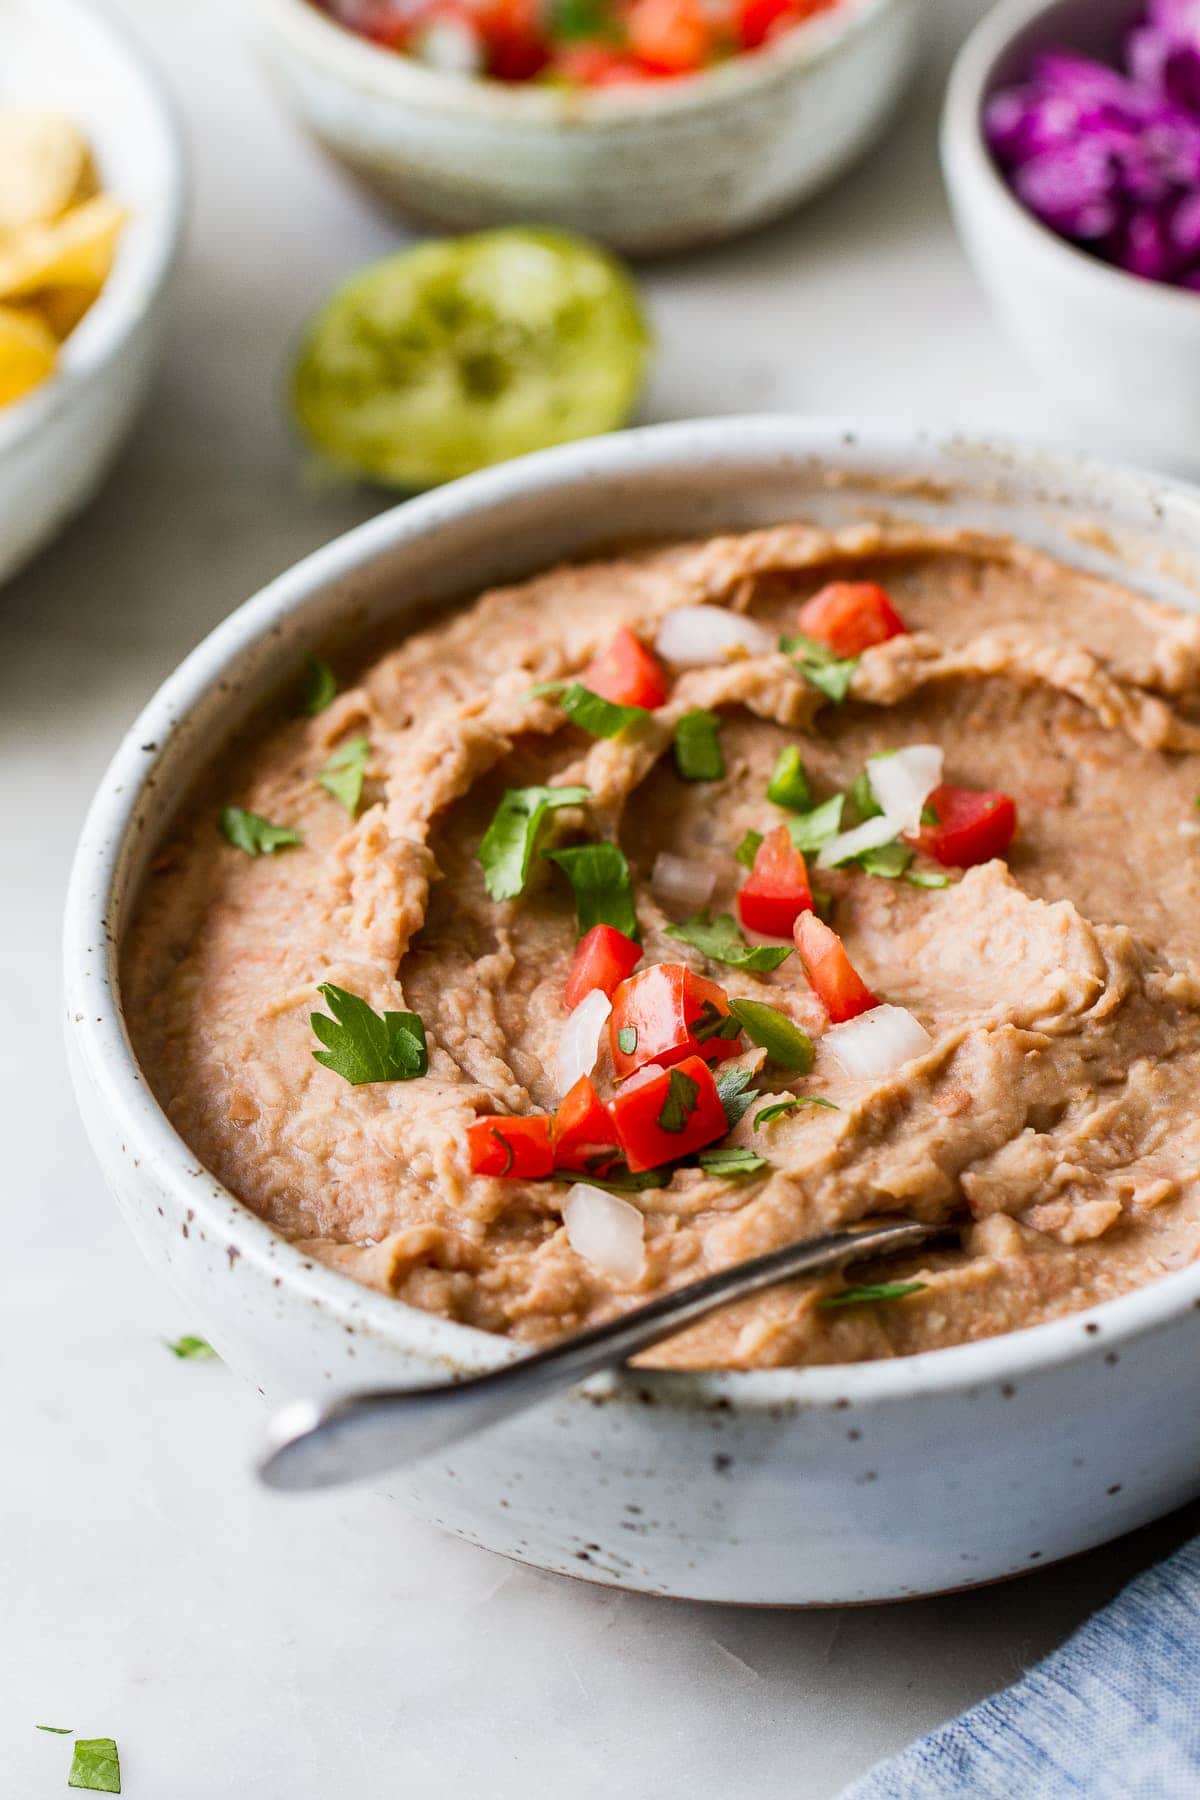 QUICK + EASY REFRIED BEANS